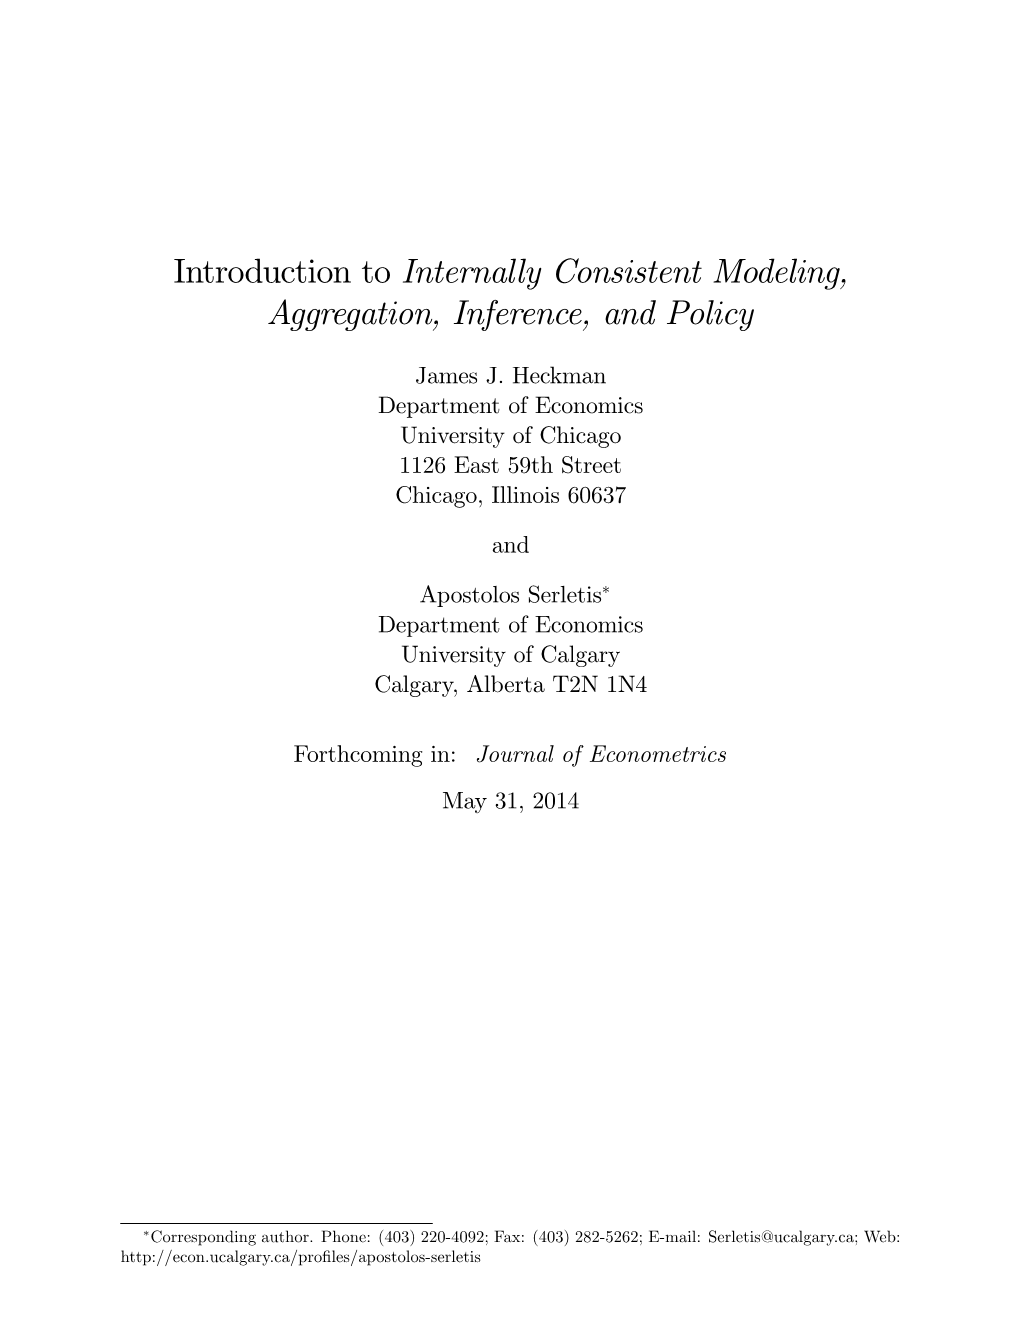 Introduction to Internally Consistent Modeling, Aggregation, Inference, and Policy